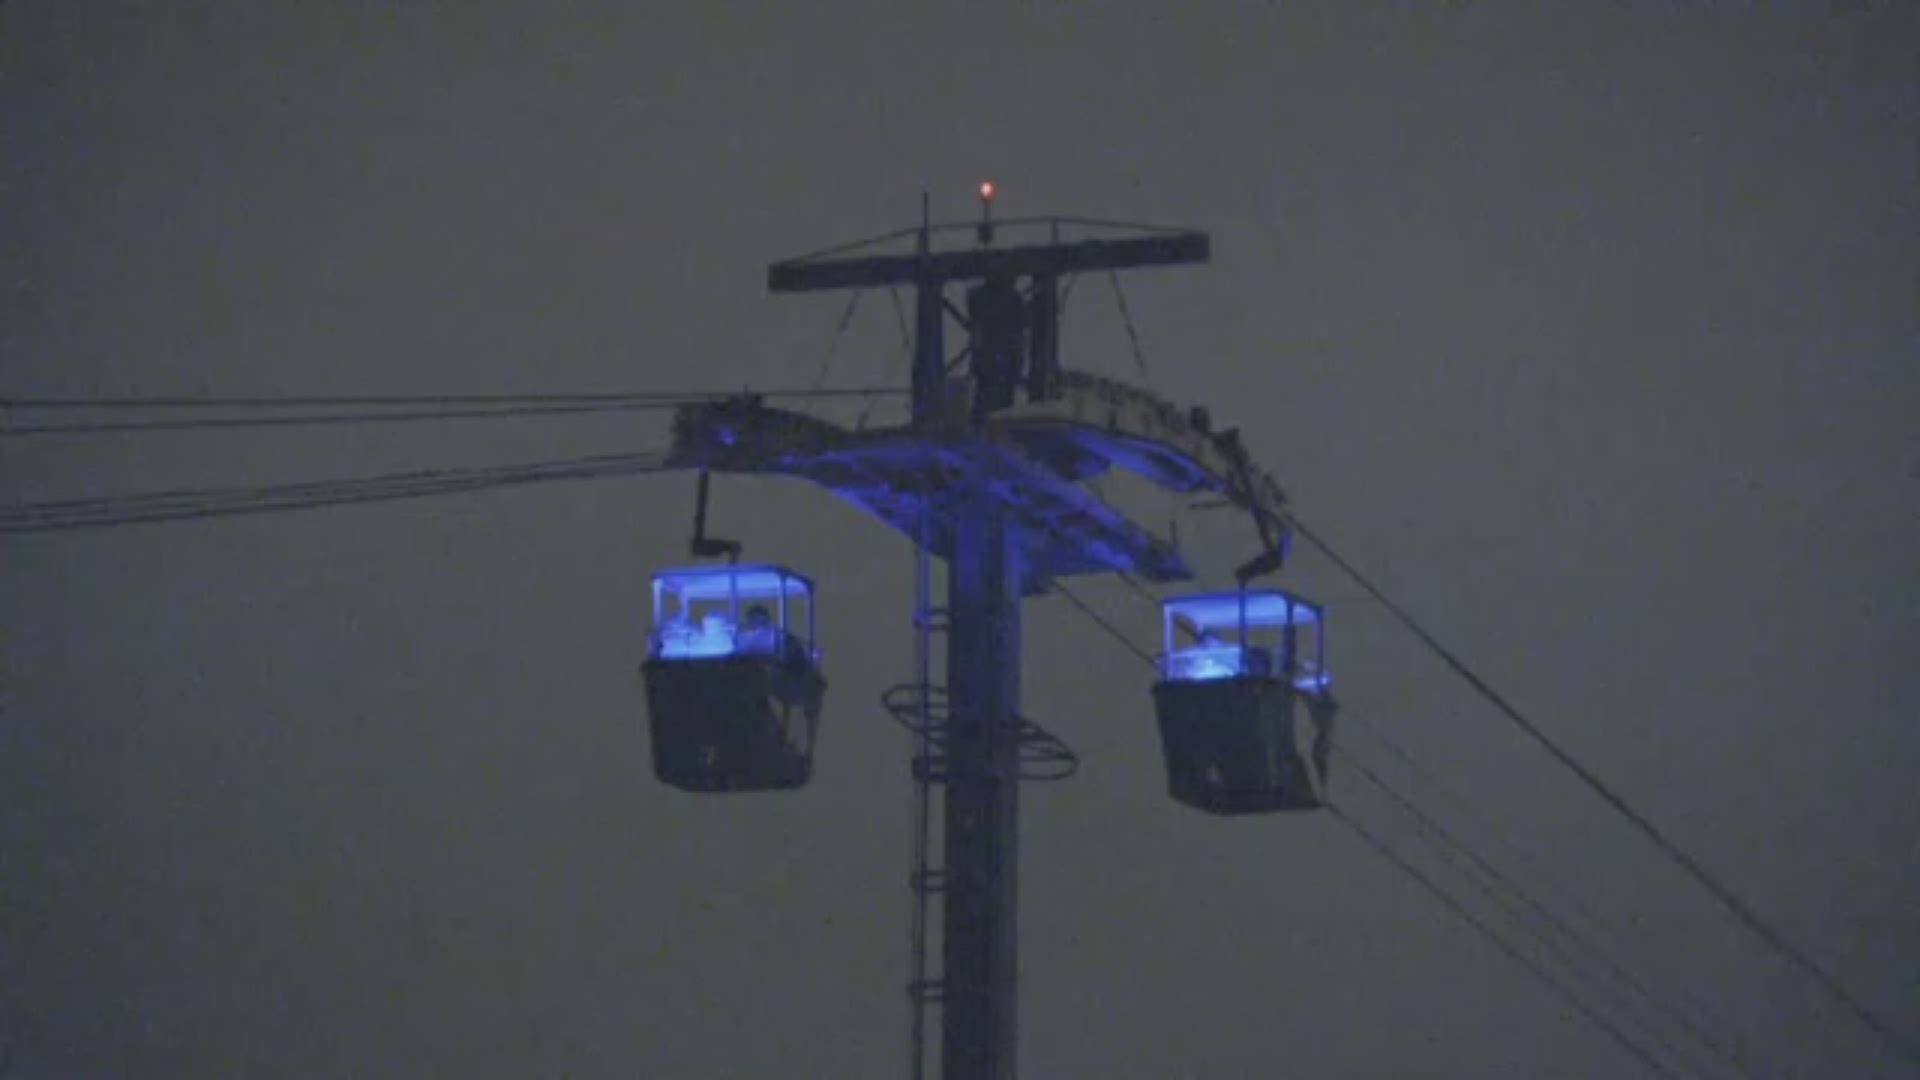 Several people were trapped Monday night on a gondola ride suspended over Mission Bay at SeaWorld in San Diego.